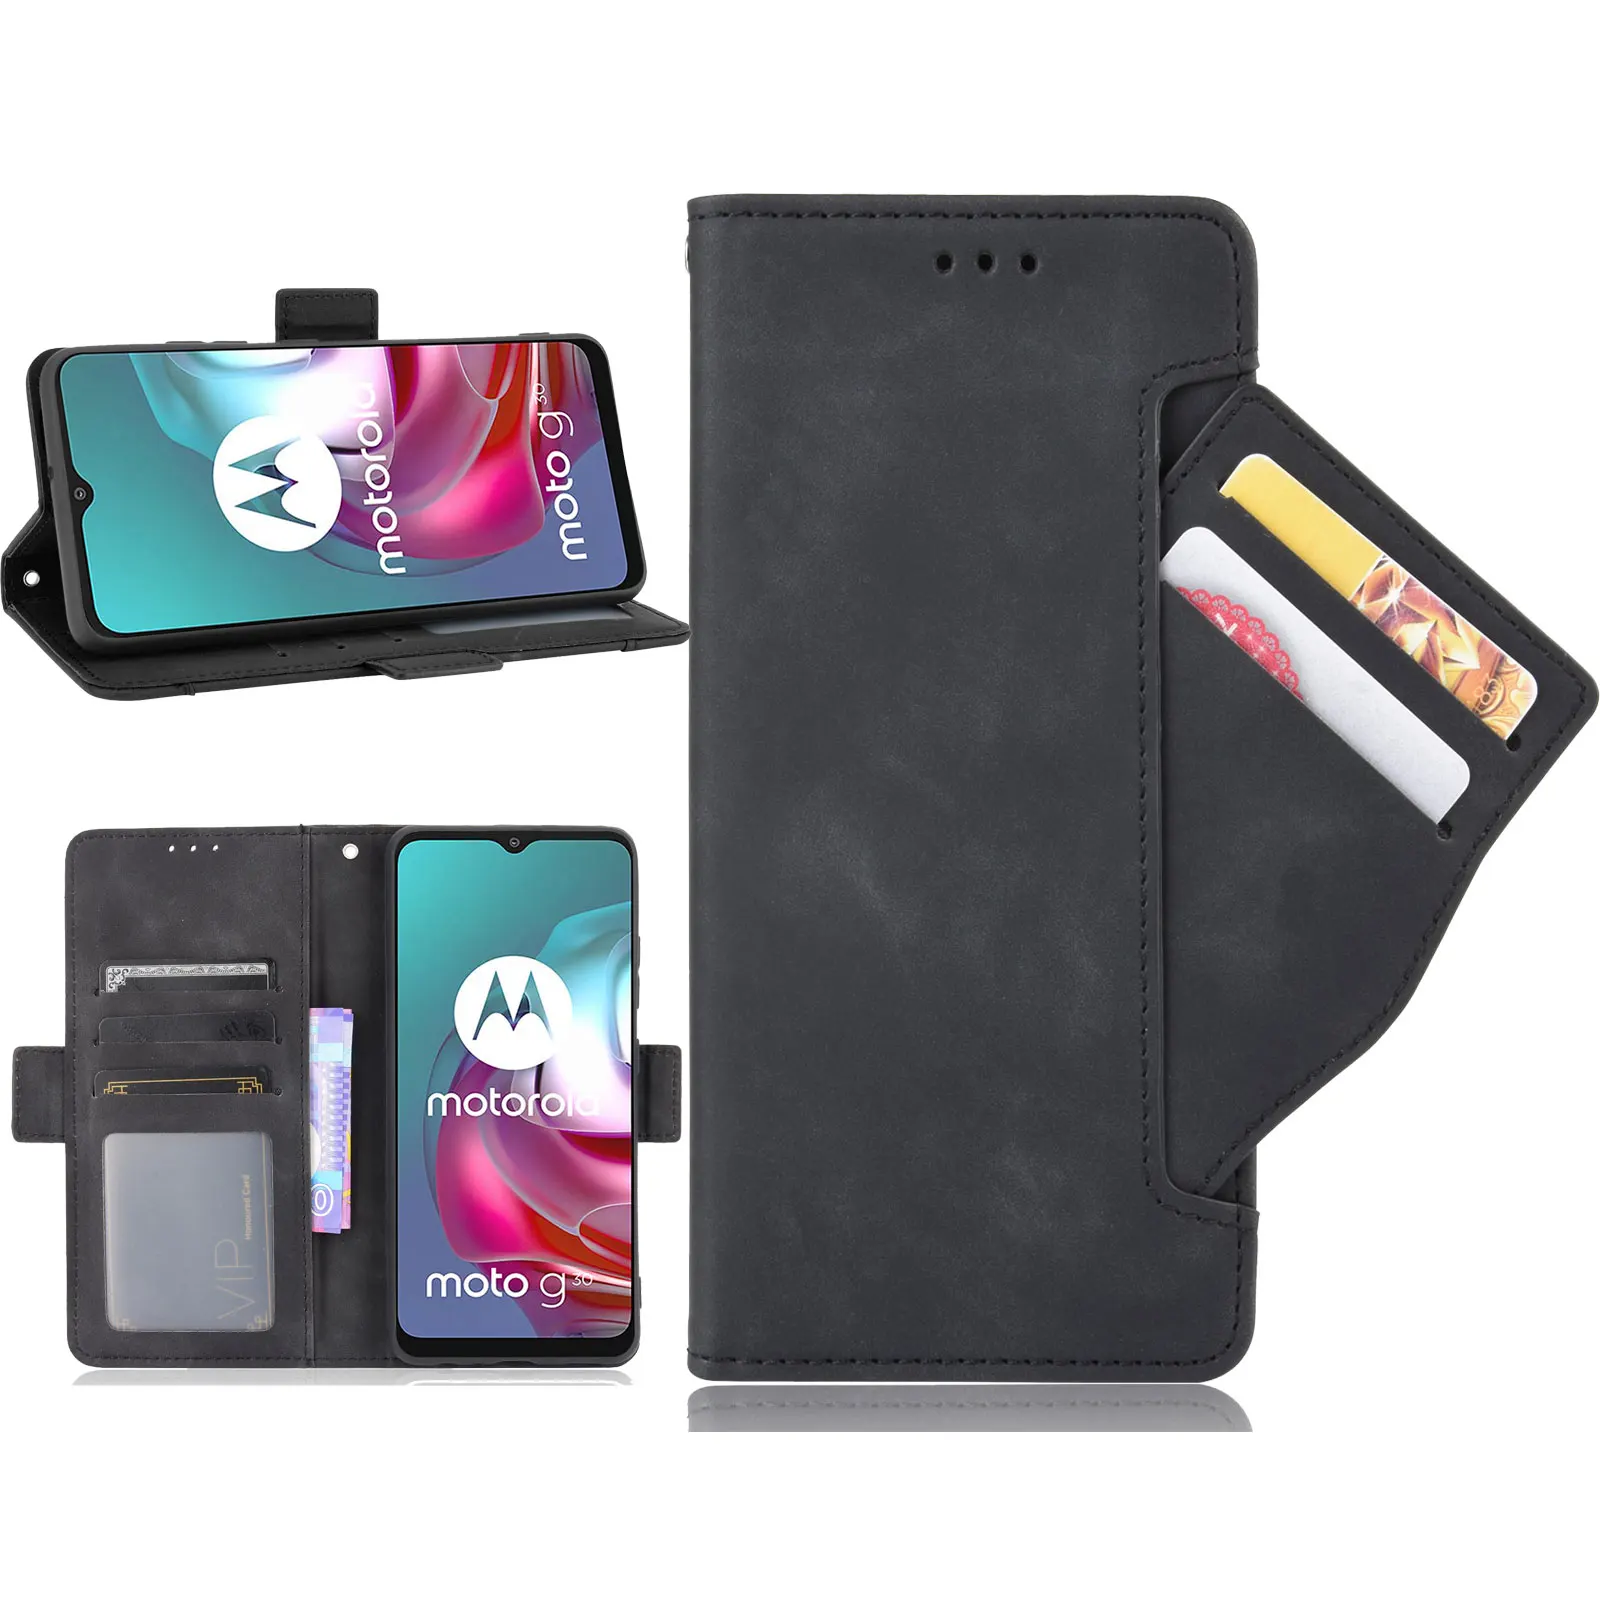 

Flip Cover Leather Wallet Phone Case For LG Stylo 7 6 5 4 3 2 4G K92 Q92 5G Style3 L-41A K41S K51S K61 Q61 K52 Q52 K62 K50S K22